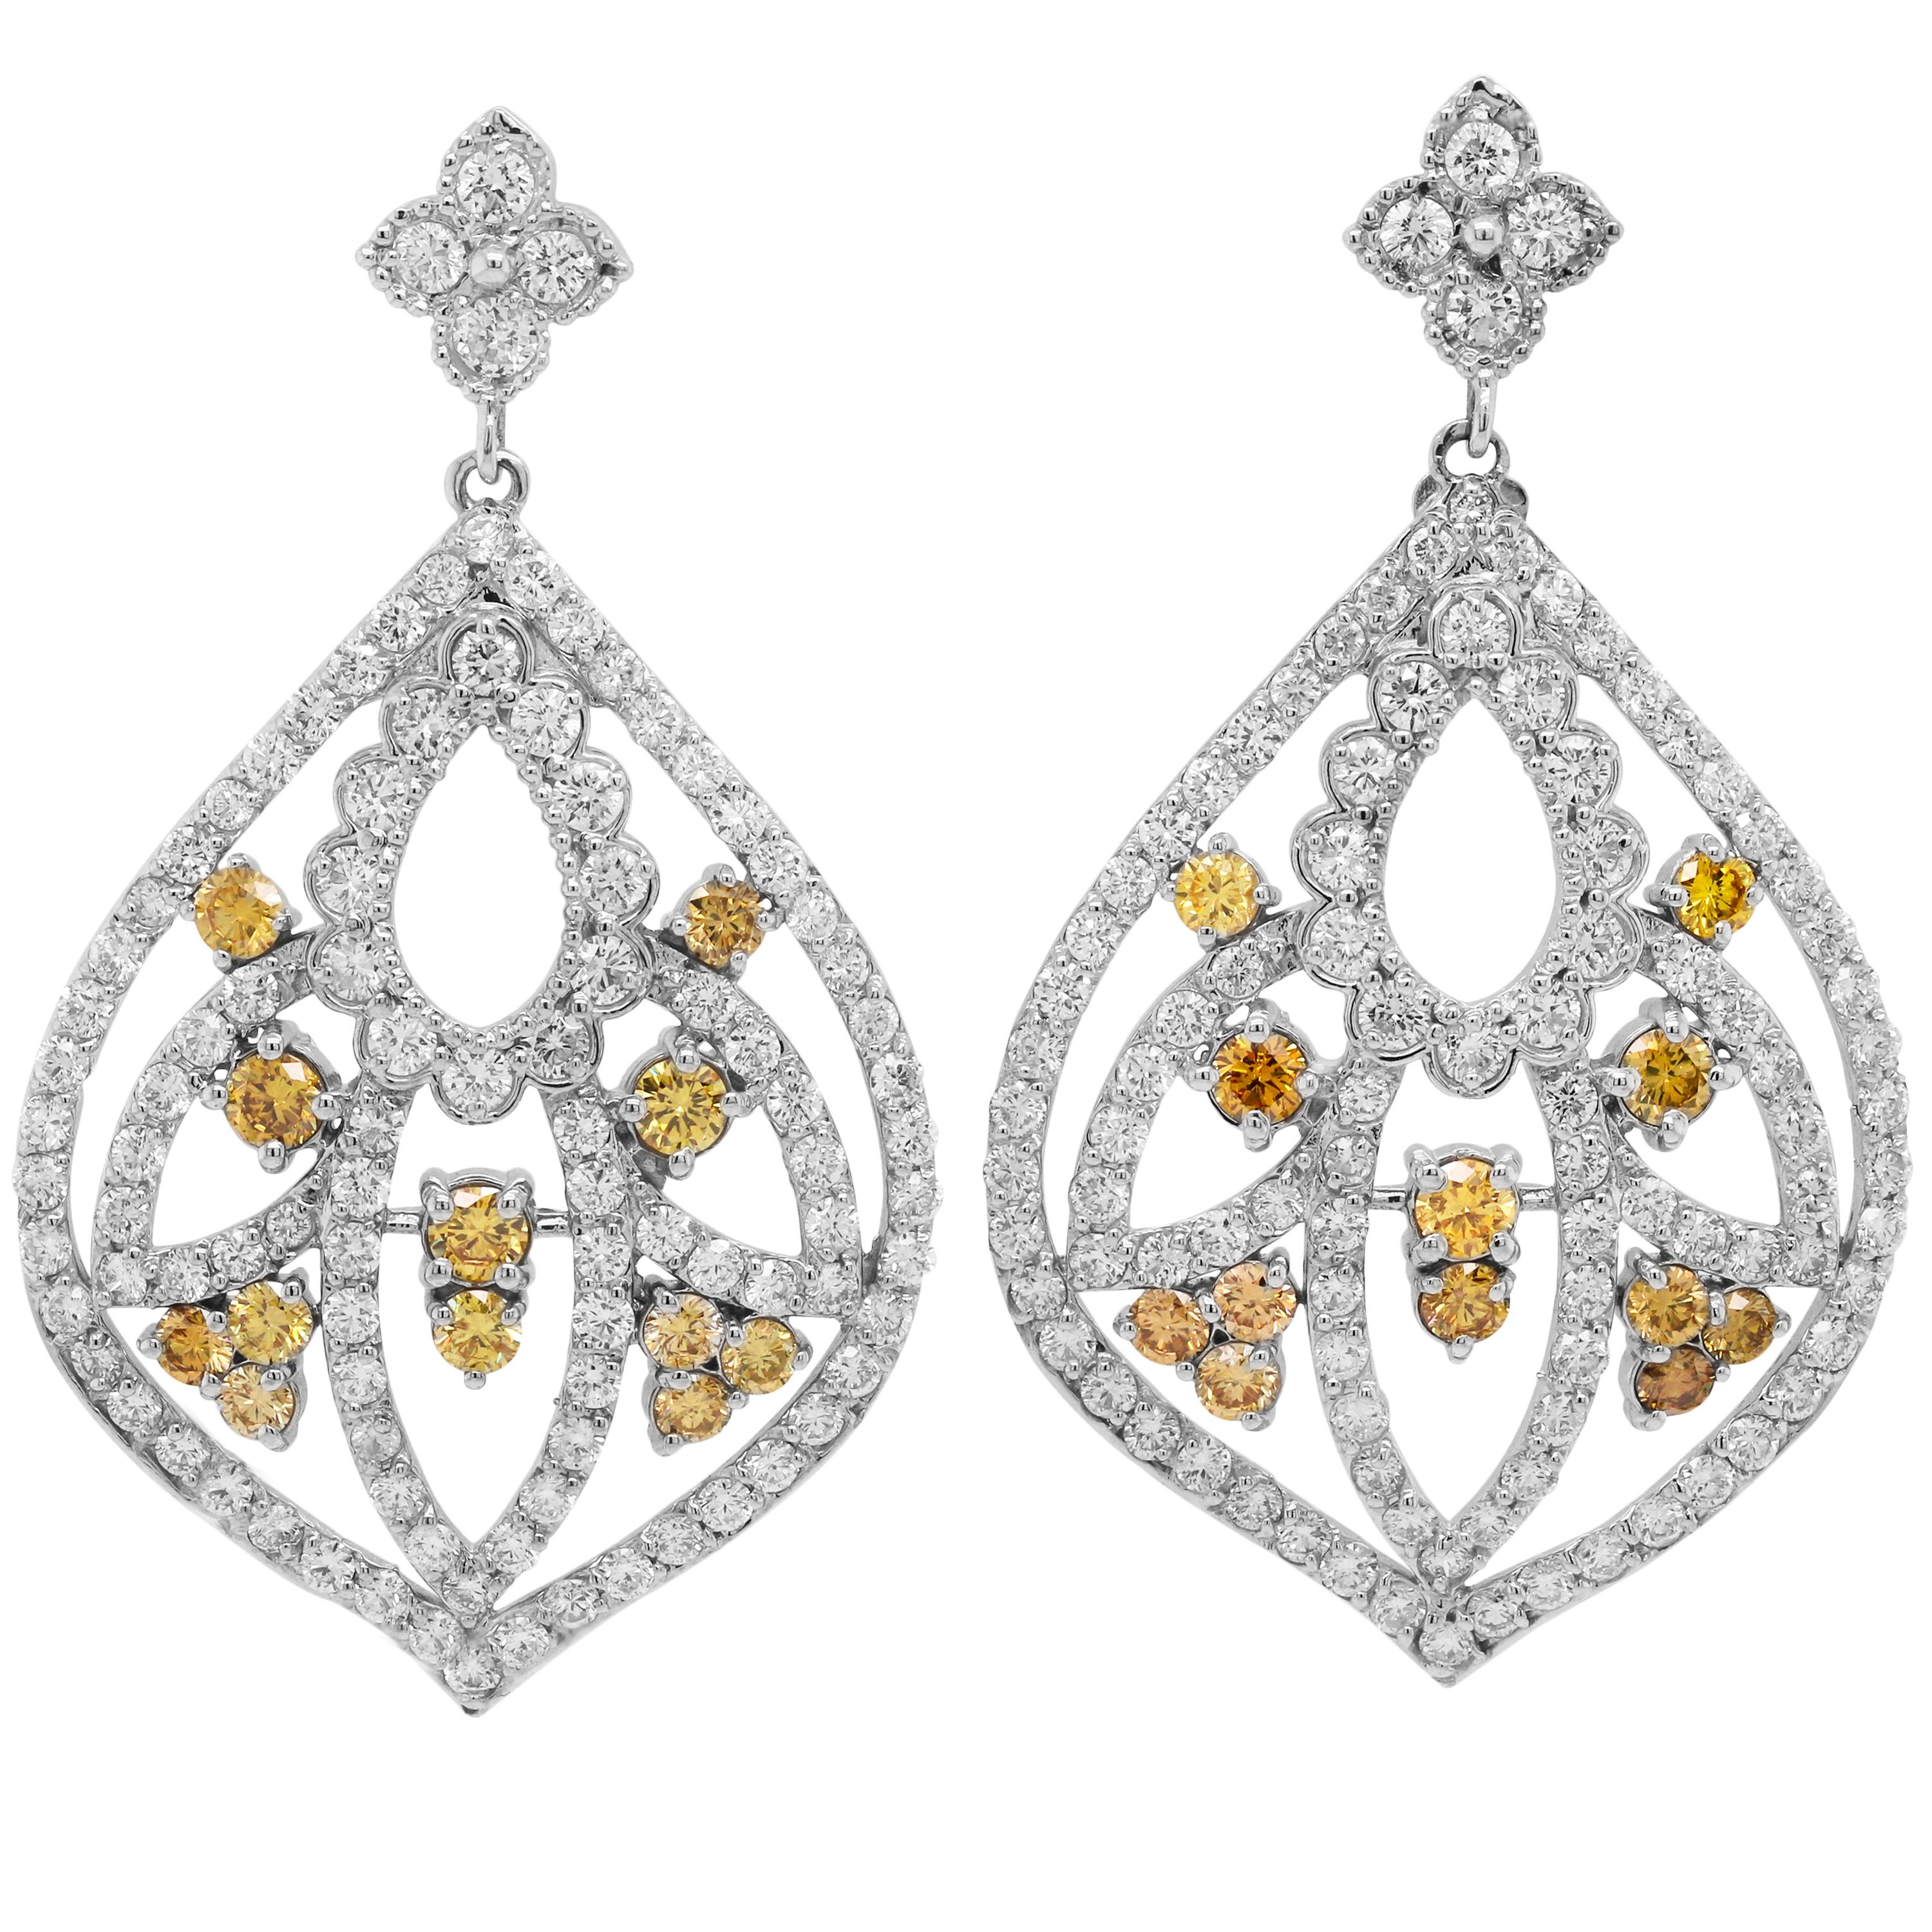 Contemporary Stambolian Canary Yellow and White Diamond 18 Karat Gold Chandelier Earrings